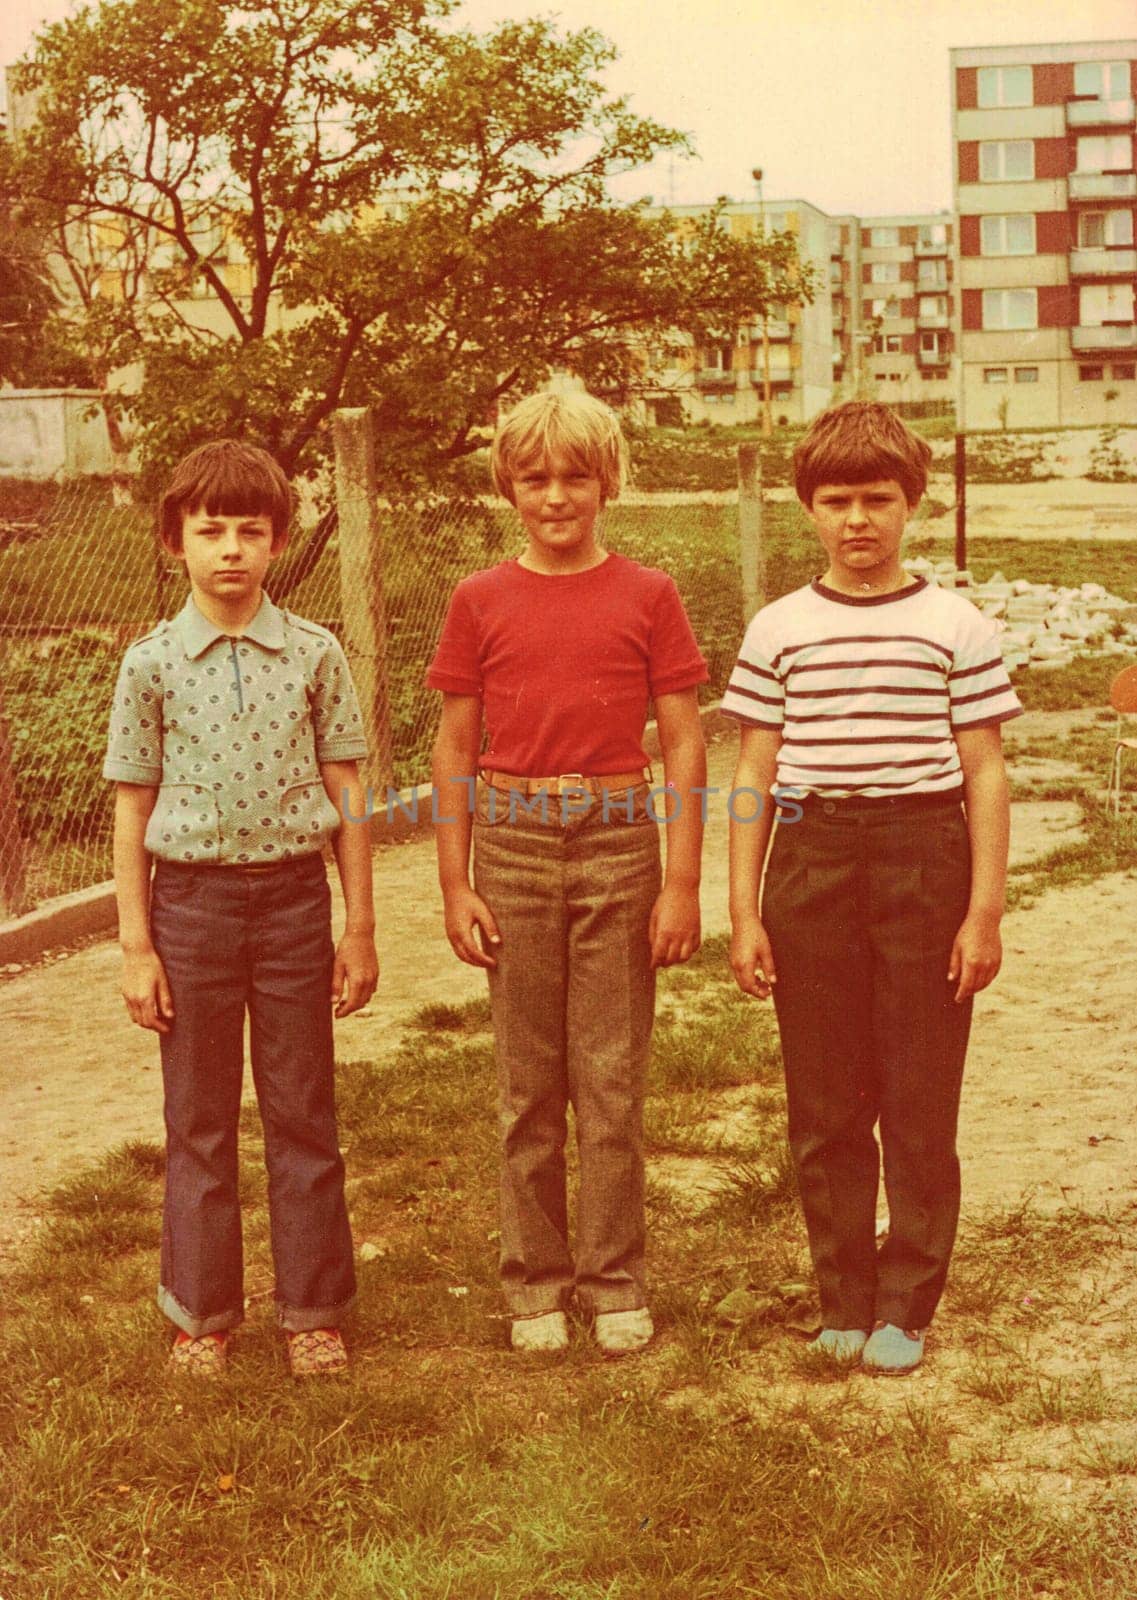 Retro photo shows pupils boys outdoors. They pose for a group photography. Color photo. by roman_nerud